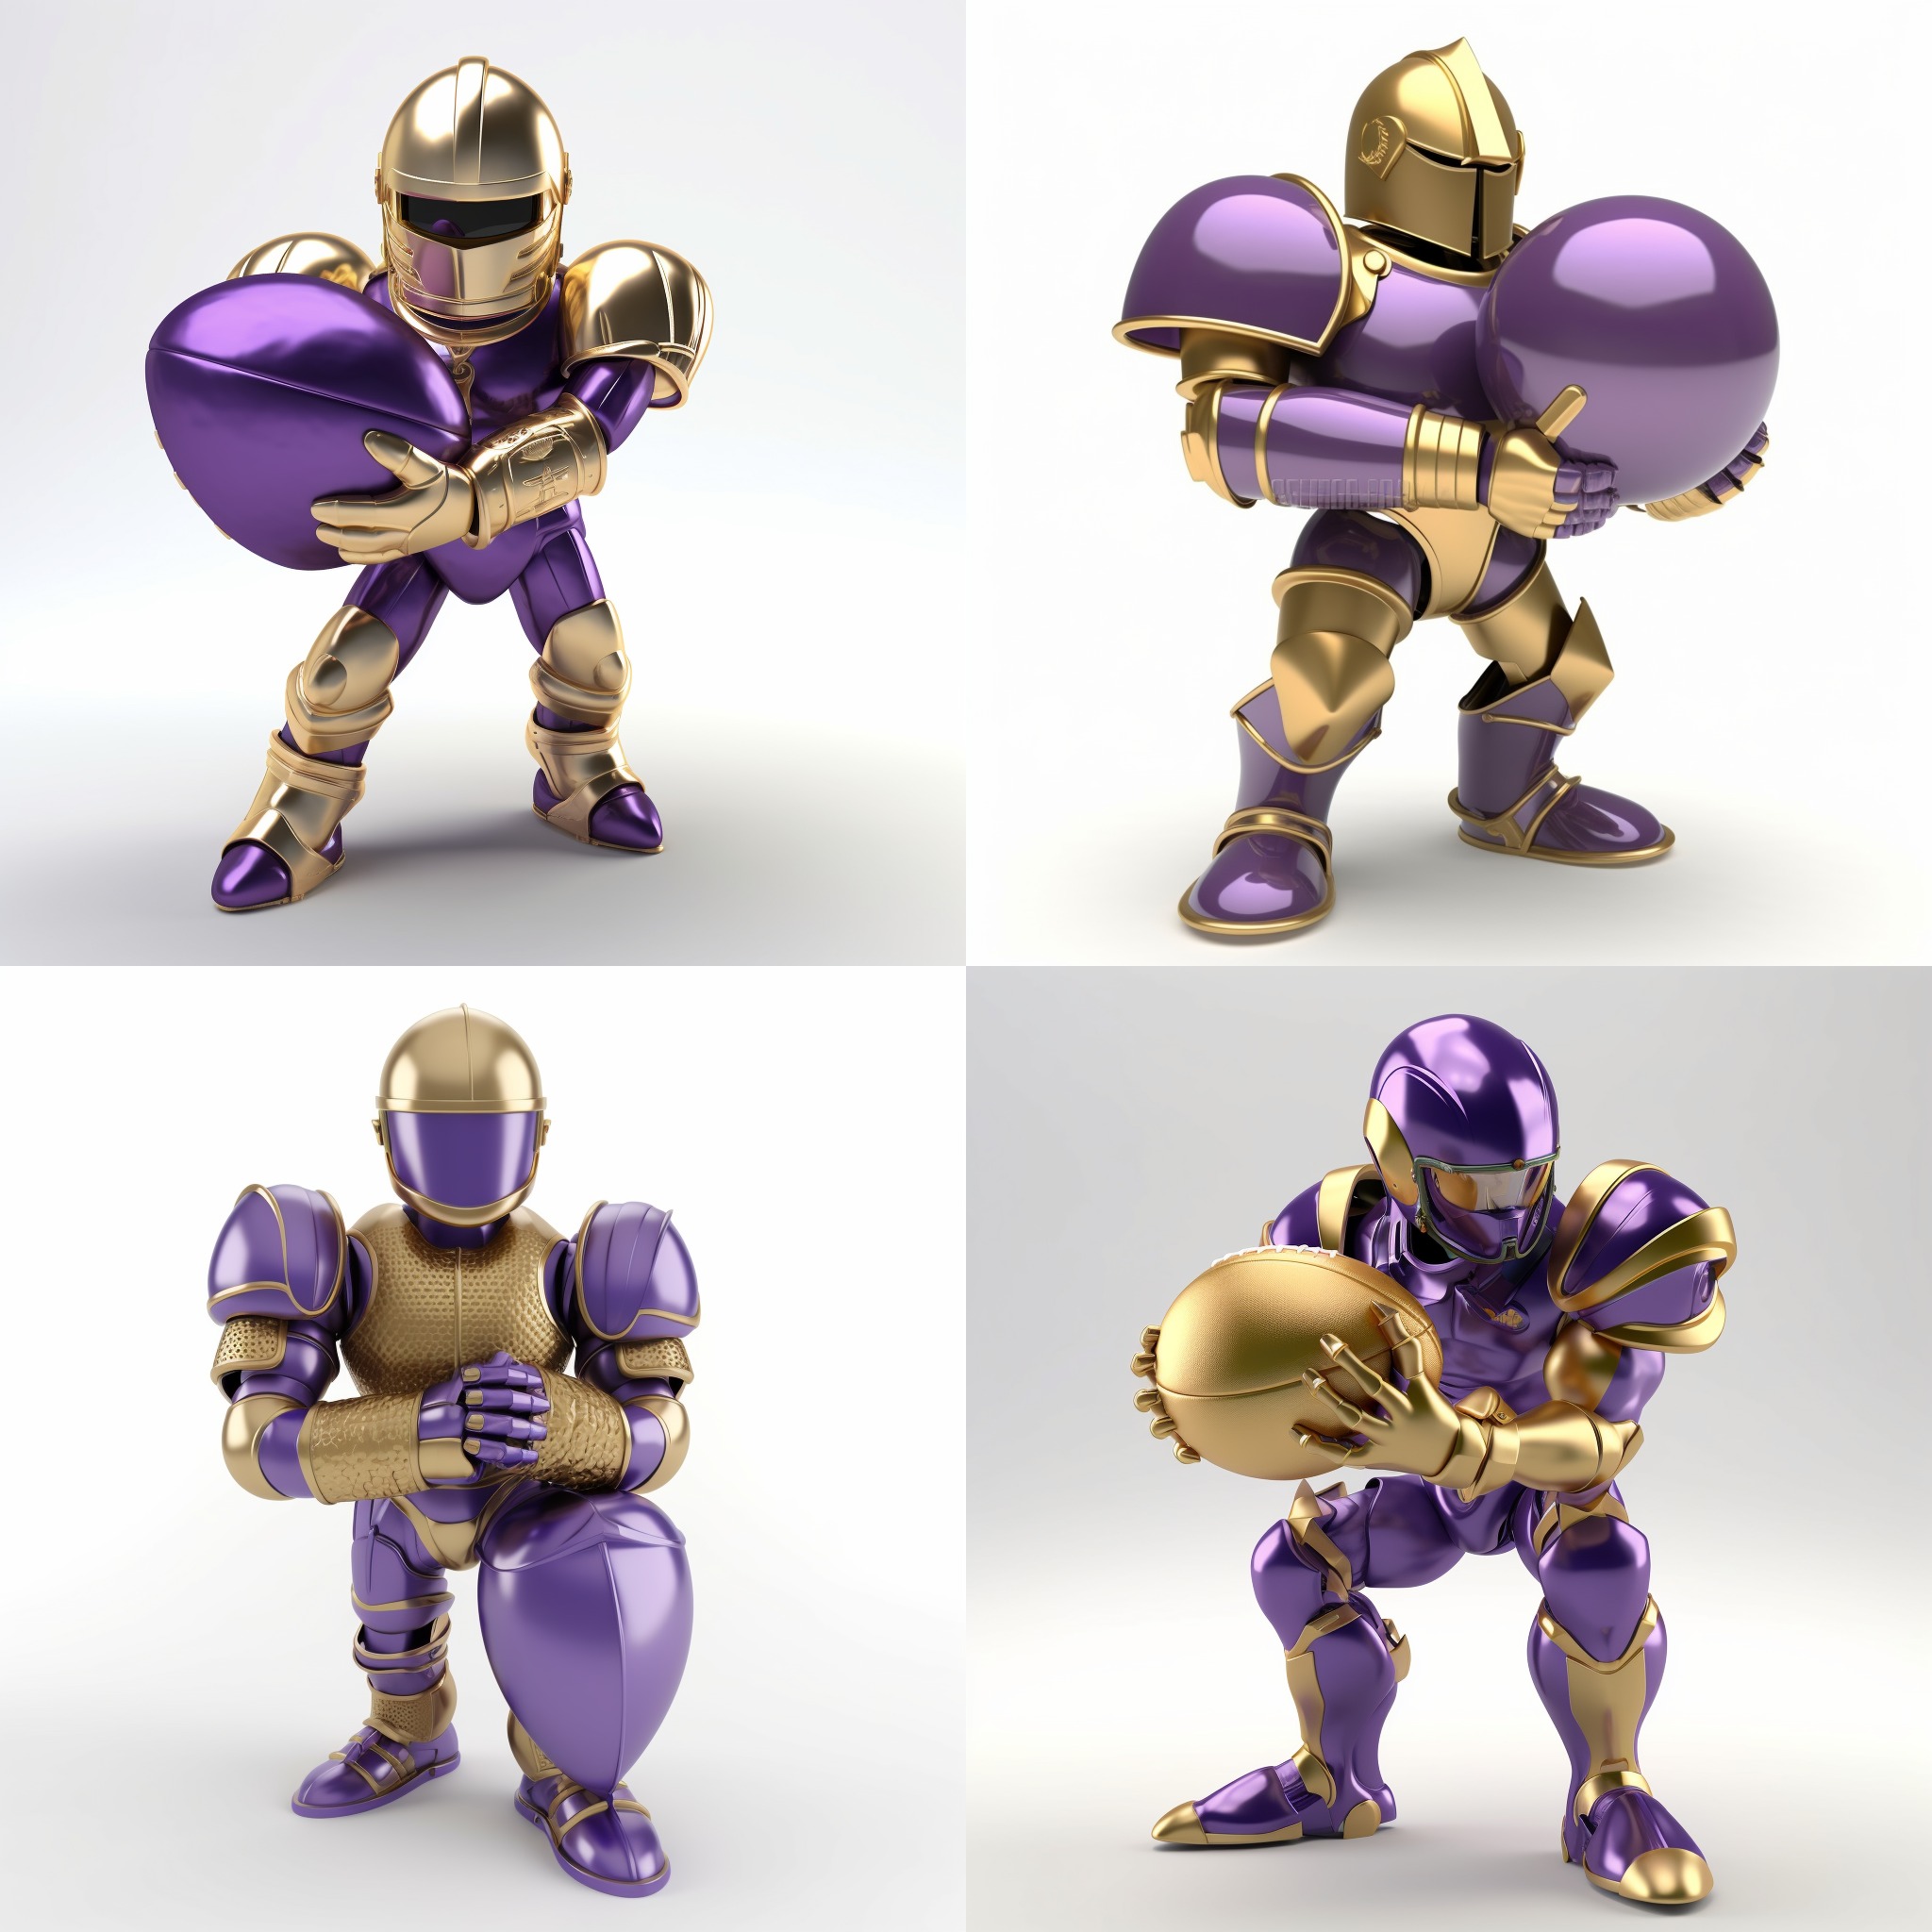 3d image of a knight in a purple and gold football uniforn